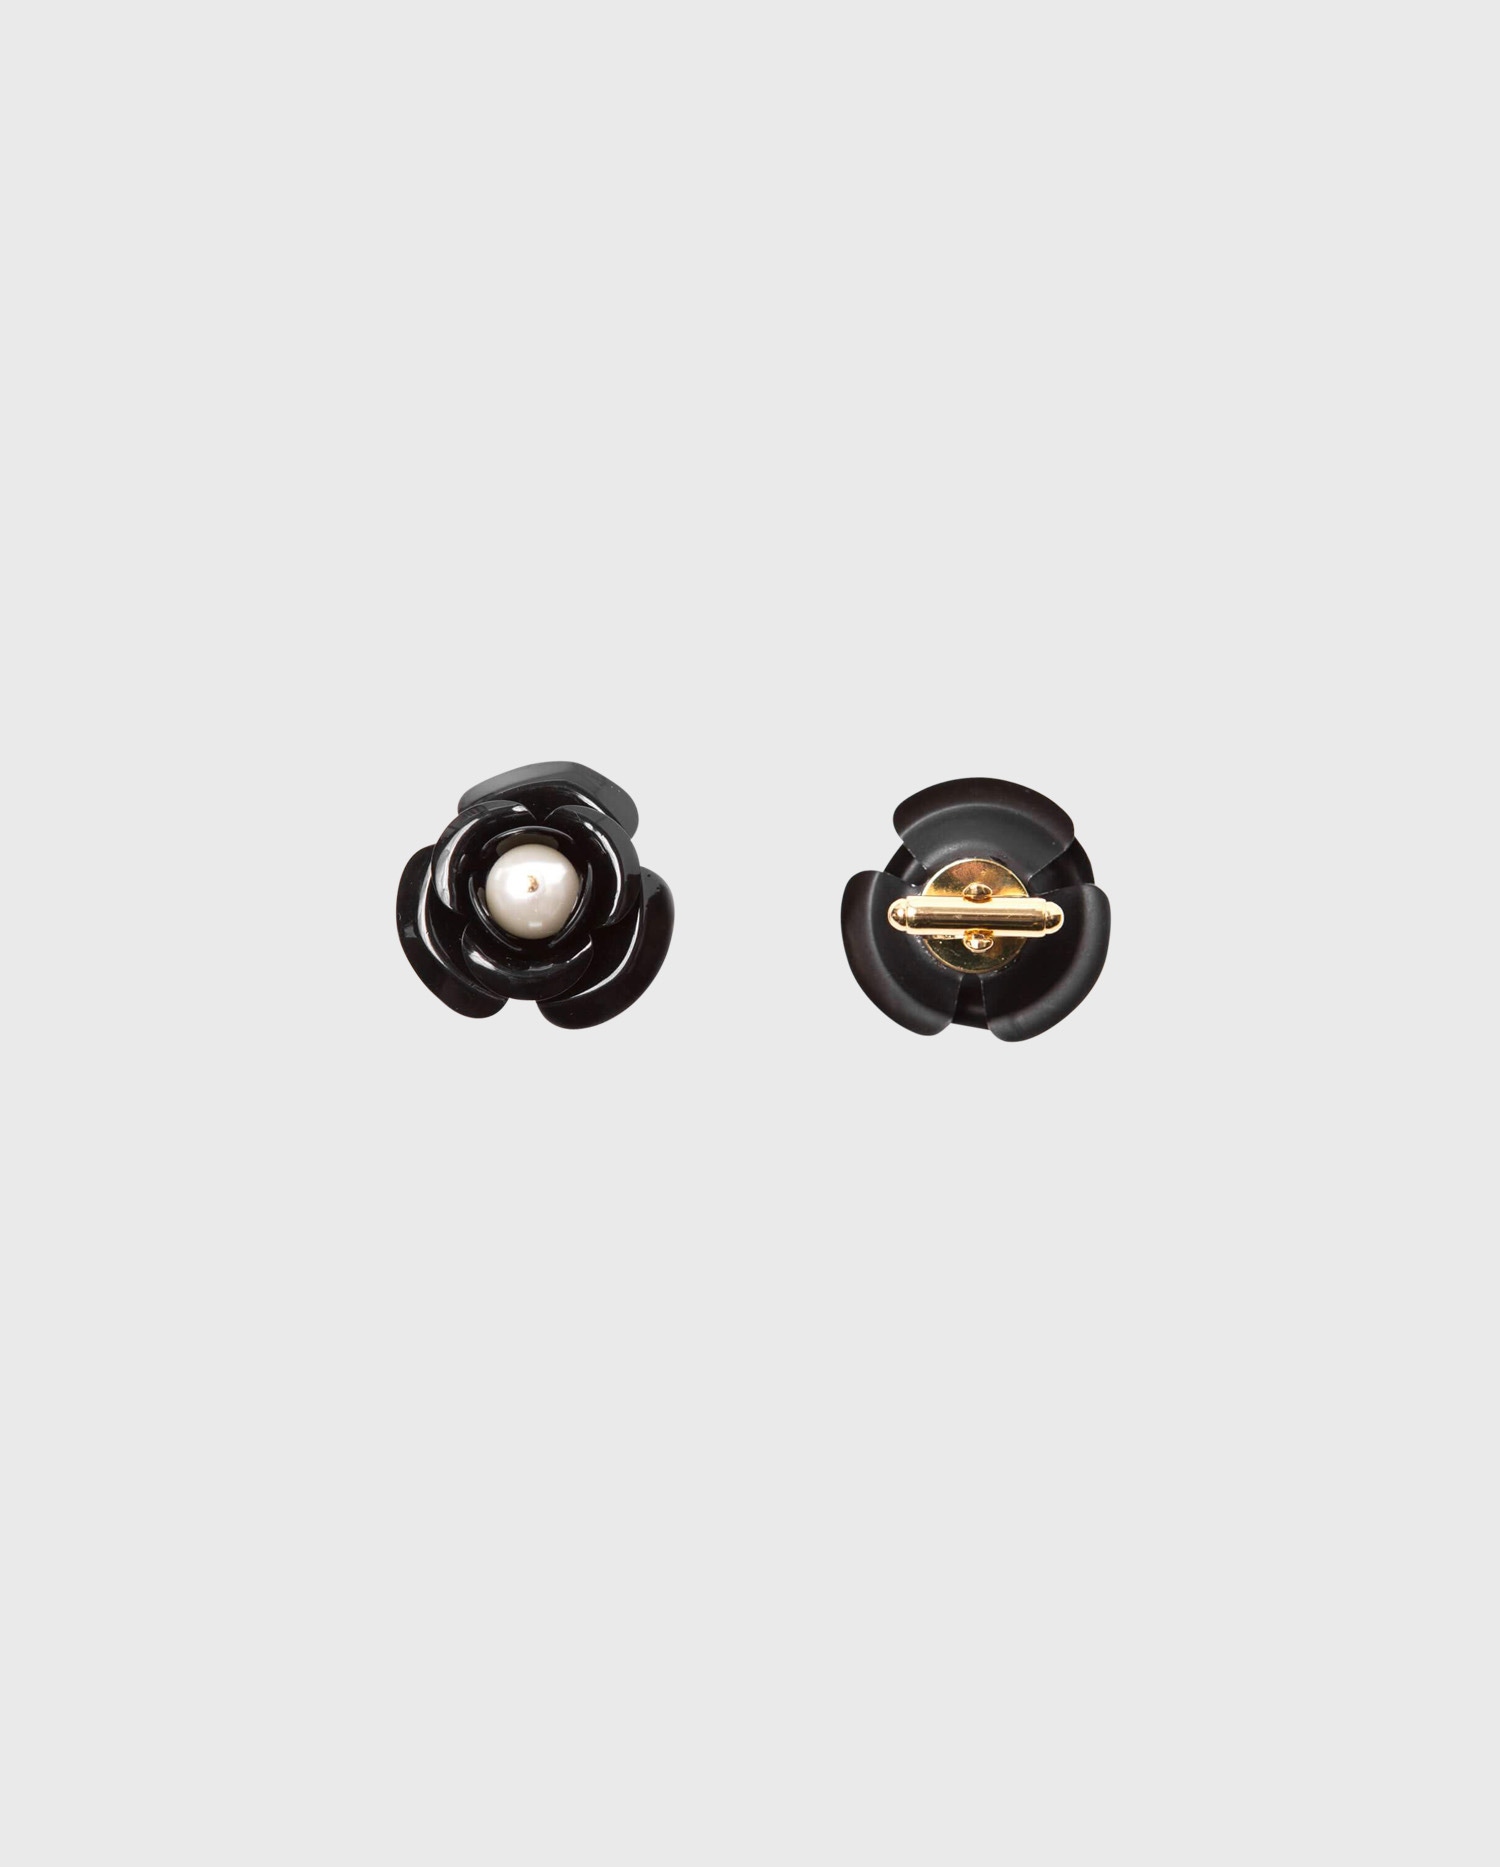 Disocver the ILON Floral and Pearl cufflinks with a light gold finish from ANNE FONTAINE